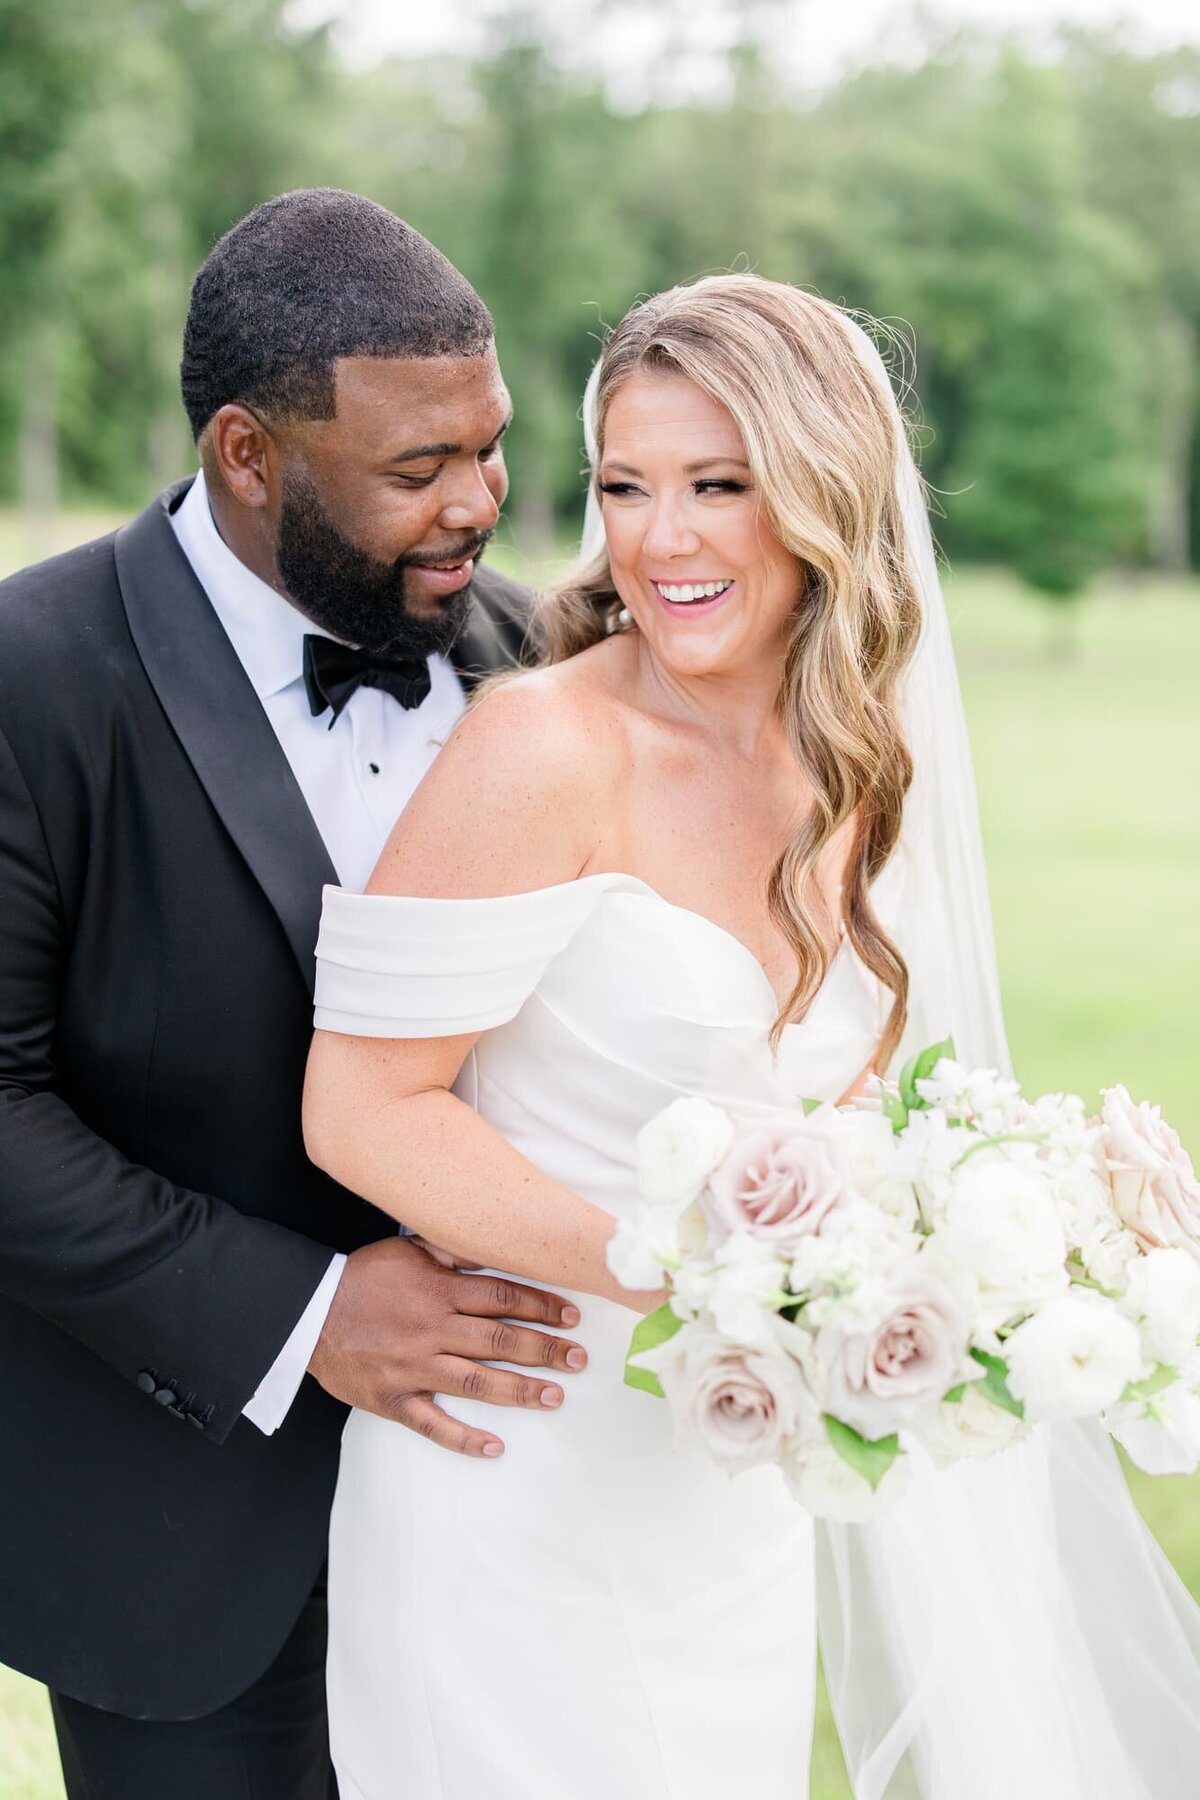 Katie and Alec Wedding Photography Wedding Videography Birmingham, Alabama Husband and Wife Team Photo Video Weddings Engagement Engagements Light Airy Focused on Marriage  Rachel + Eric's Oak Meado_xlQE